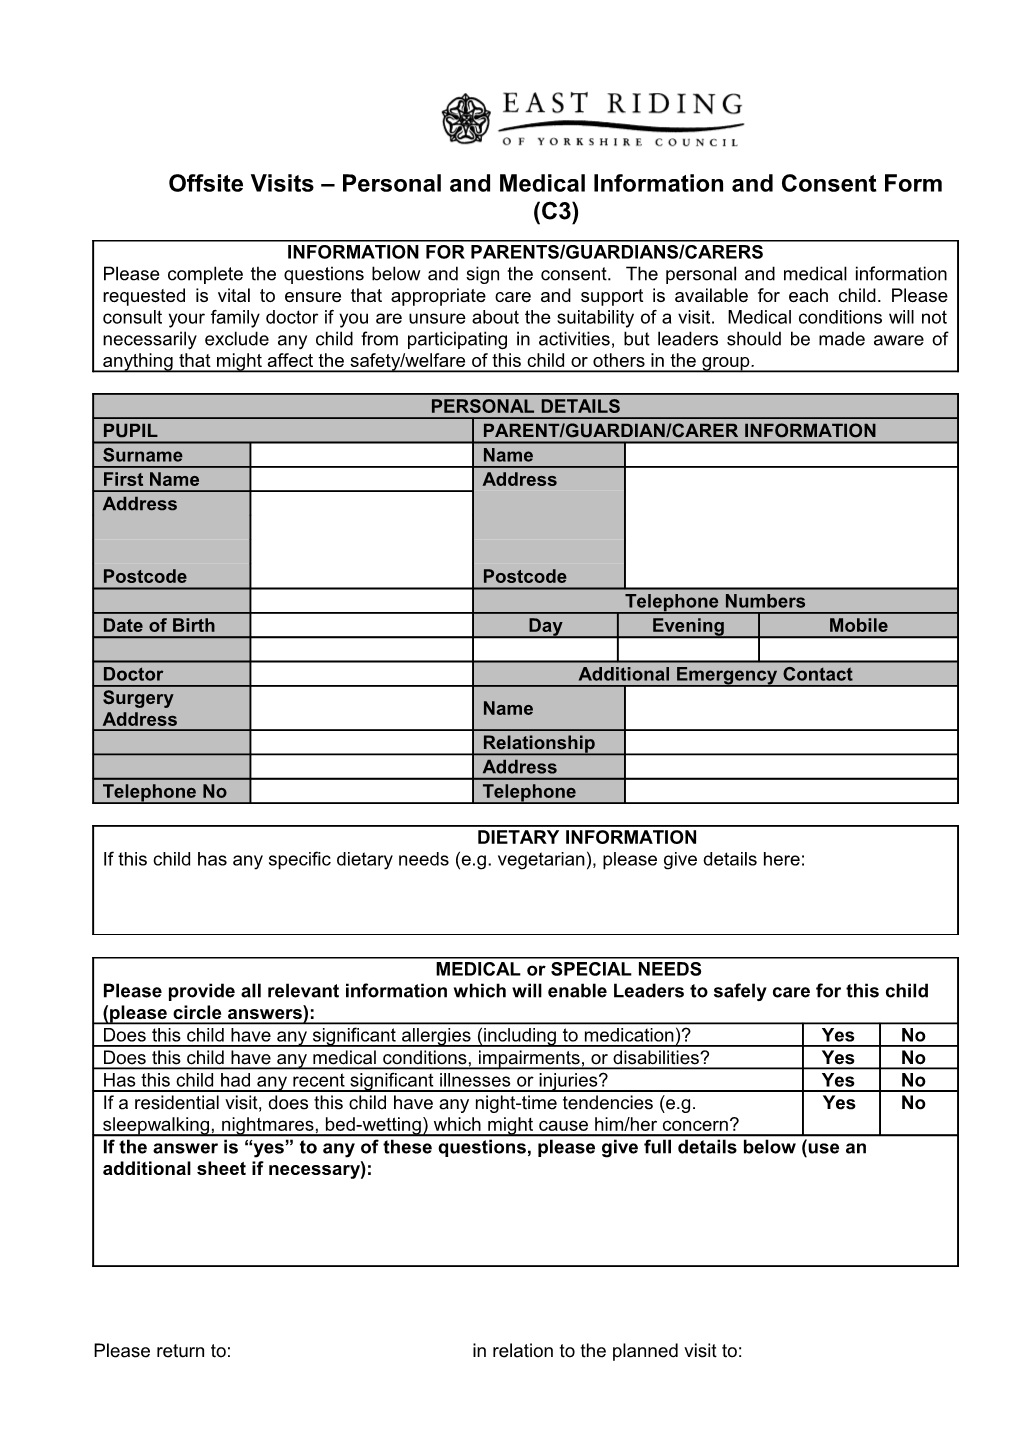 Offsite Visits Personal and Medical Information and Consent Form (C3)